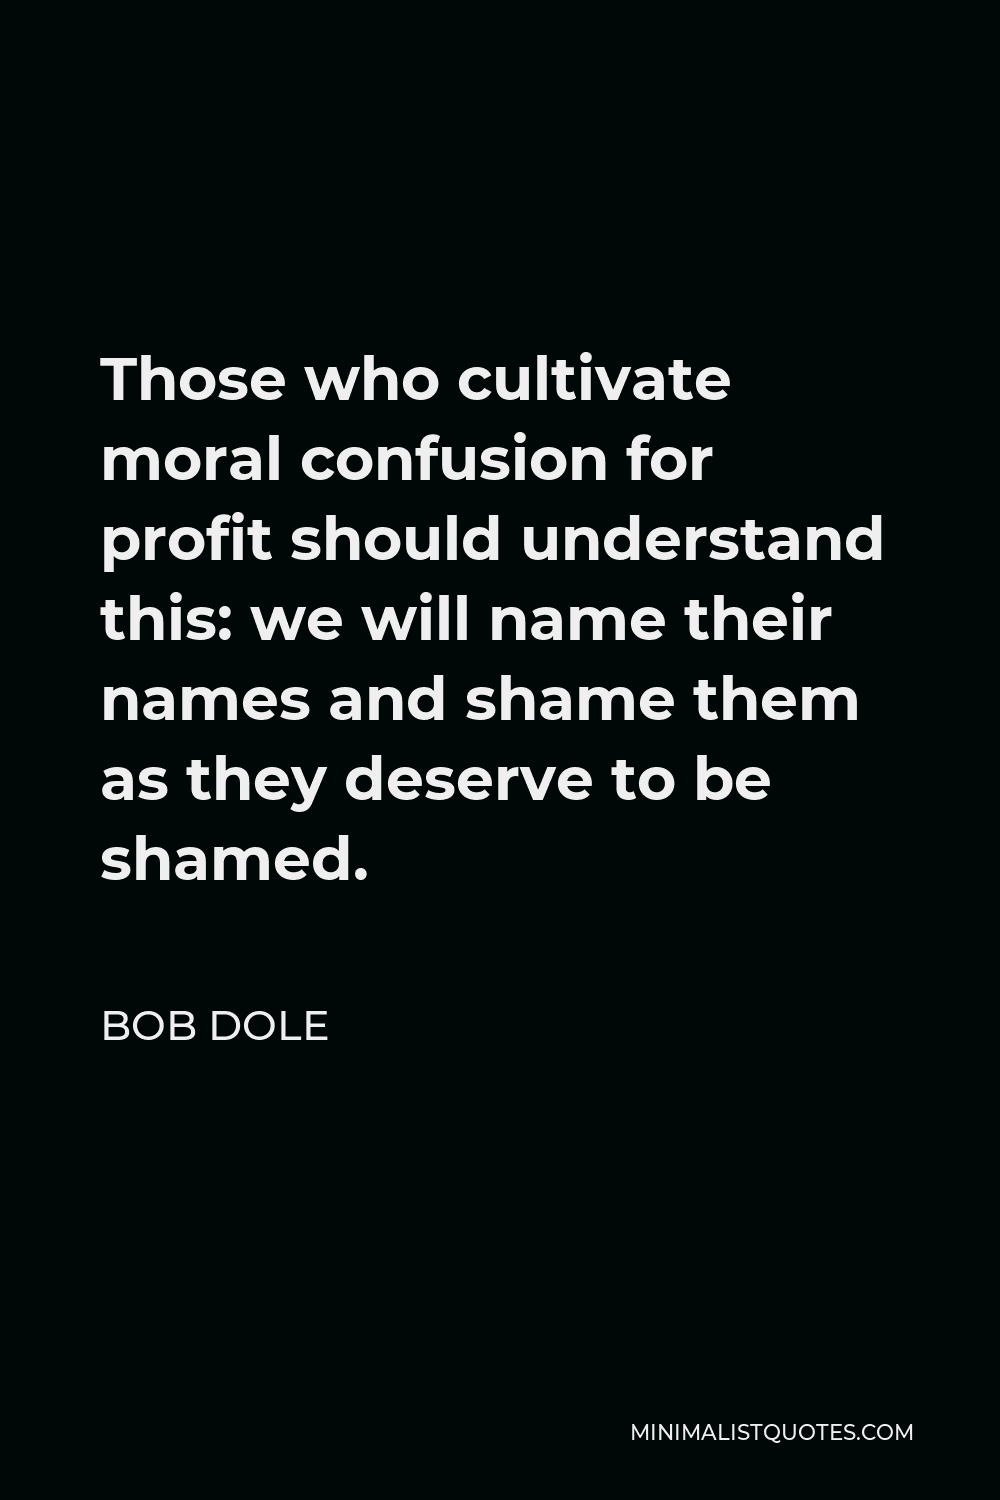 Bob Dole Quote - Those who cultivate moral confusion for profit should understand this: we will name their names and shame them as they deserve to be shamed.